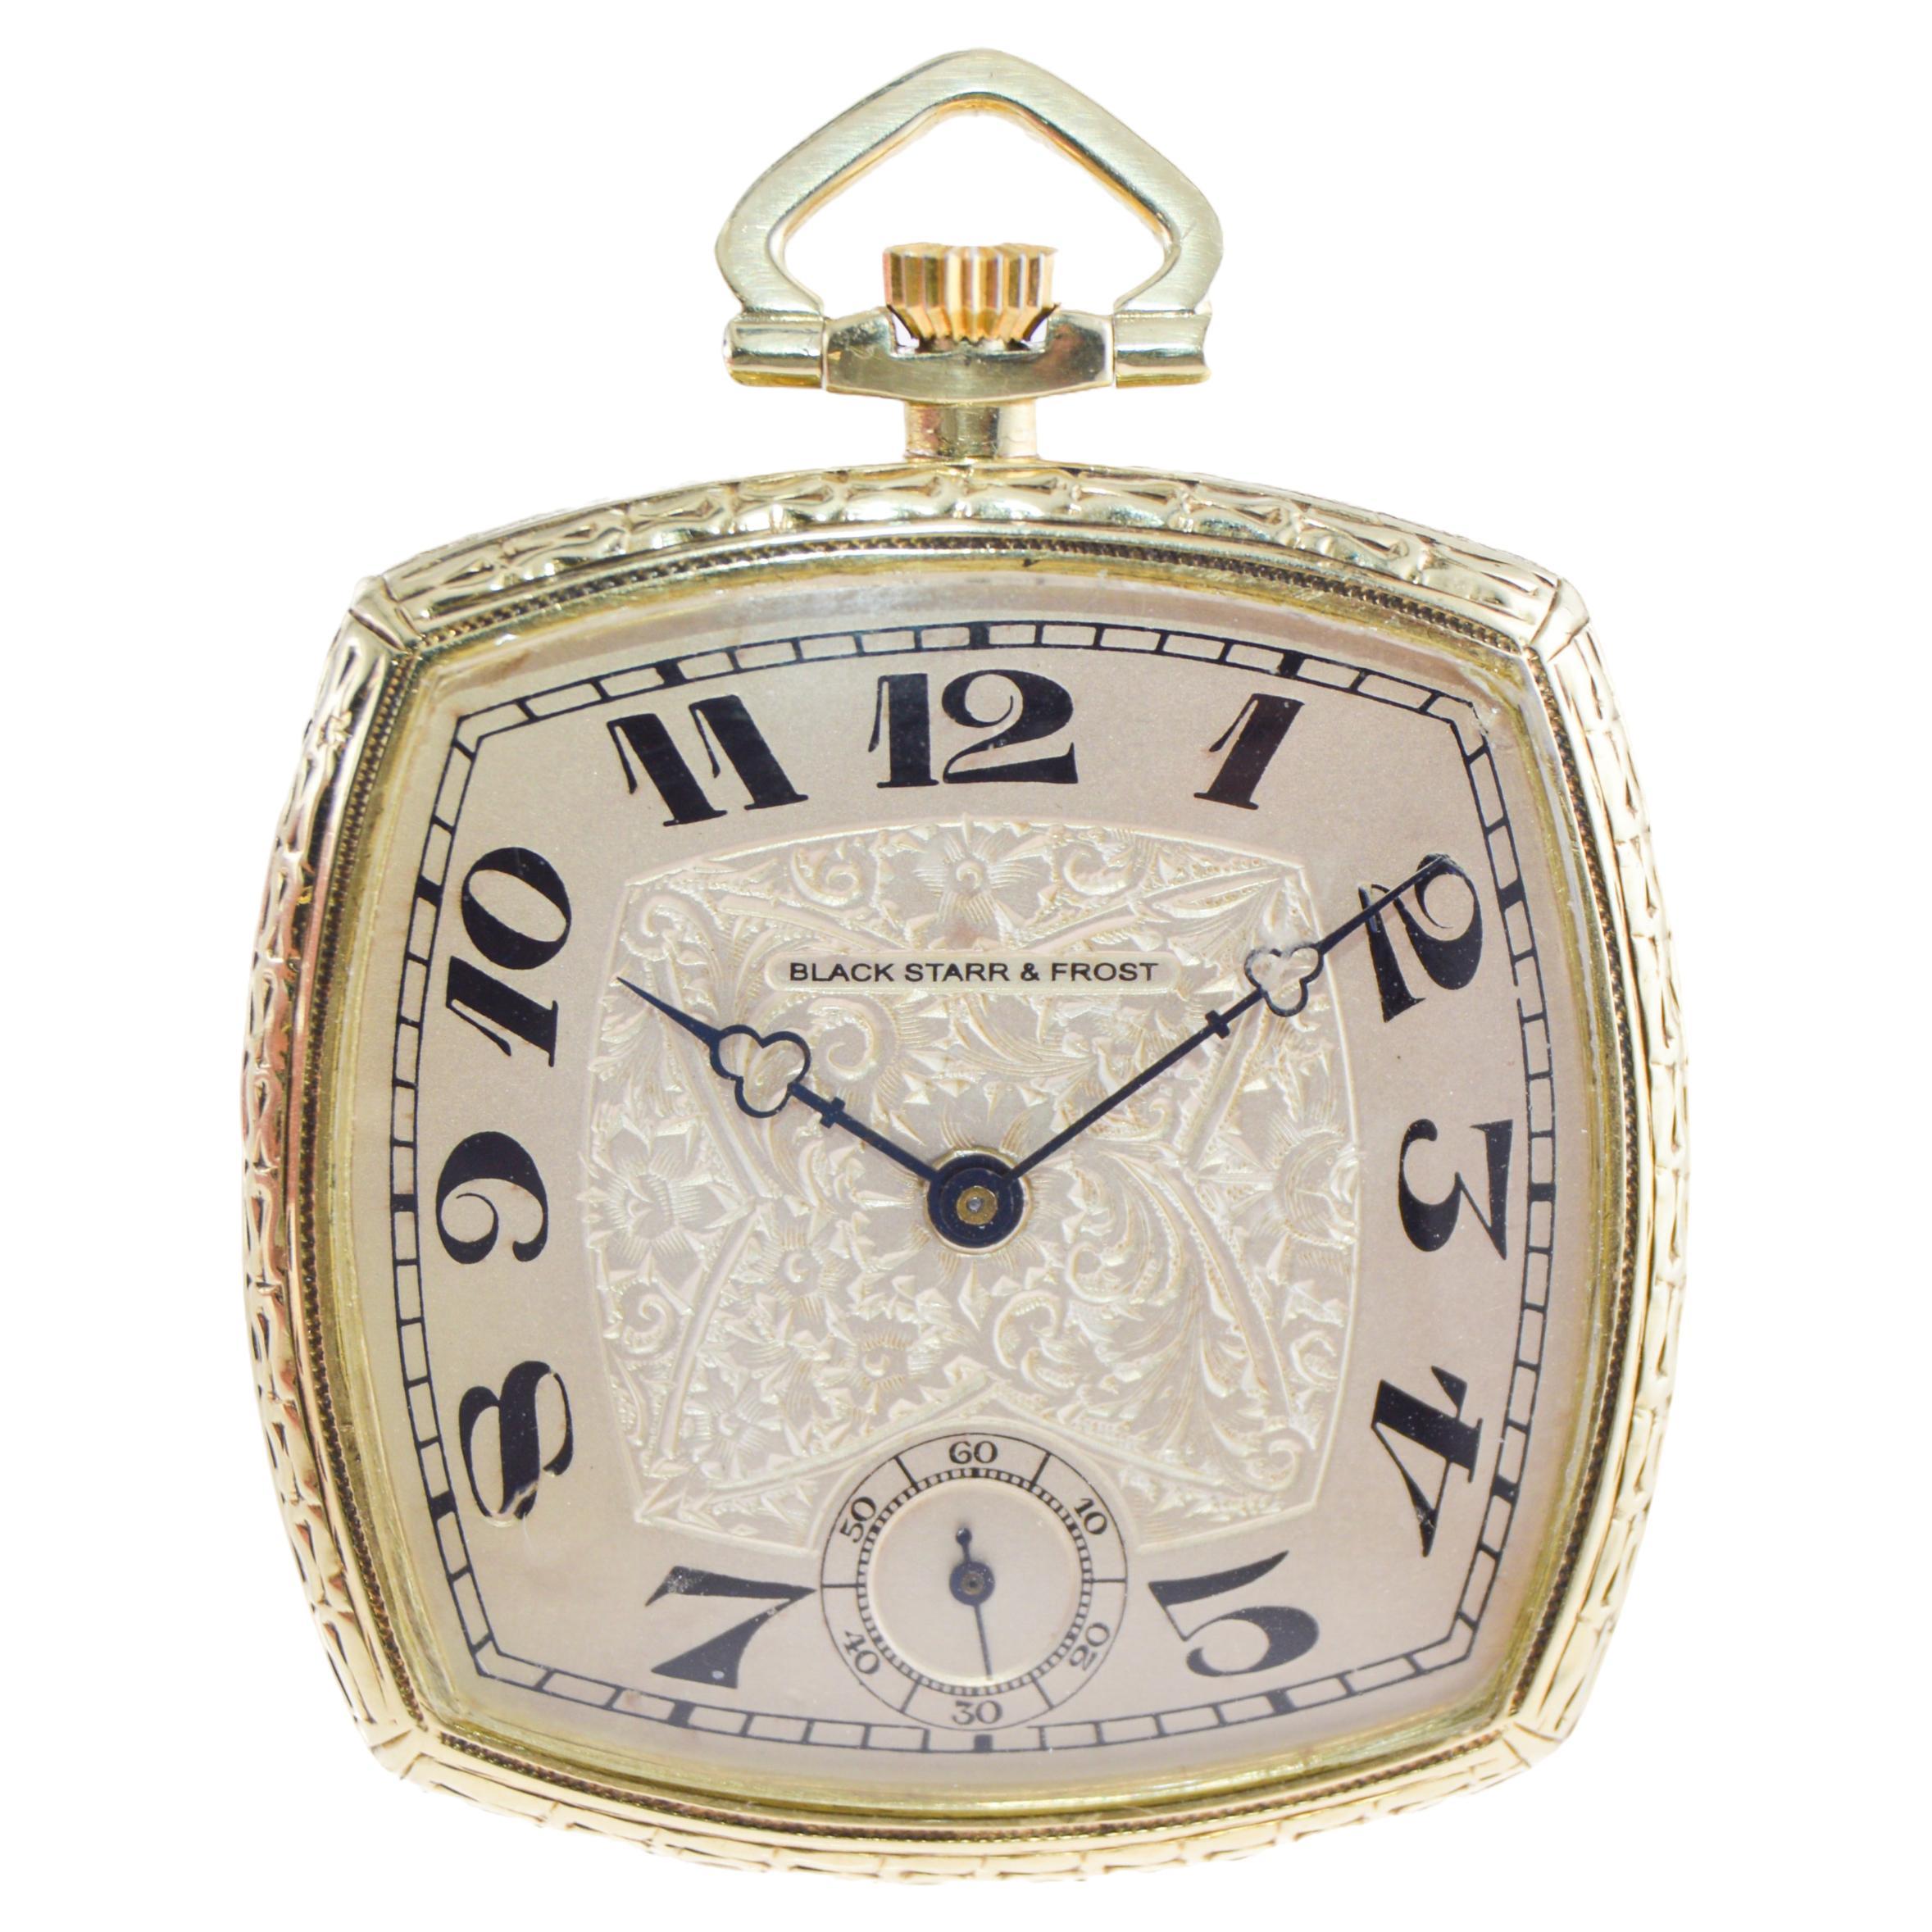 Black Starr & Frost 14 Karat Gold Art Deco Pocket Watch with Engraved Dial  For Sale 1